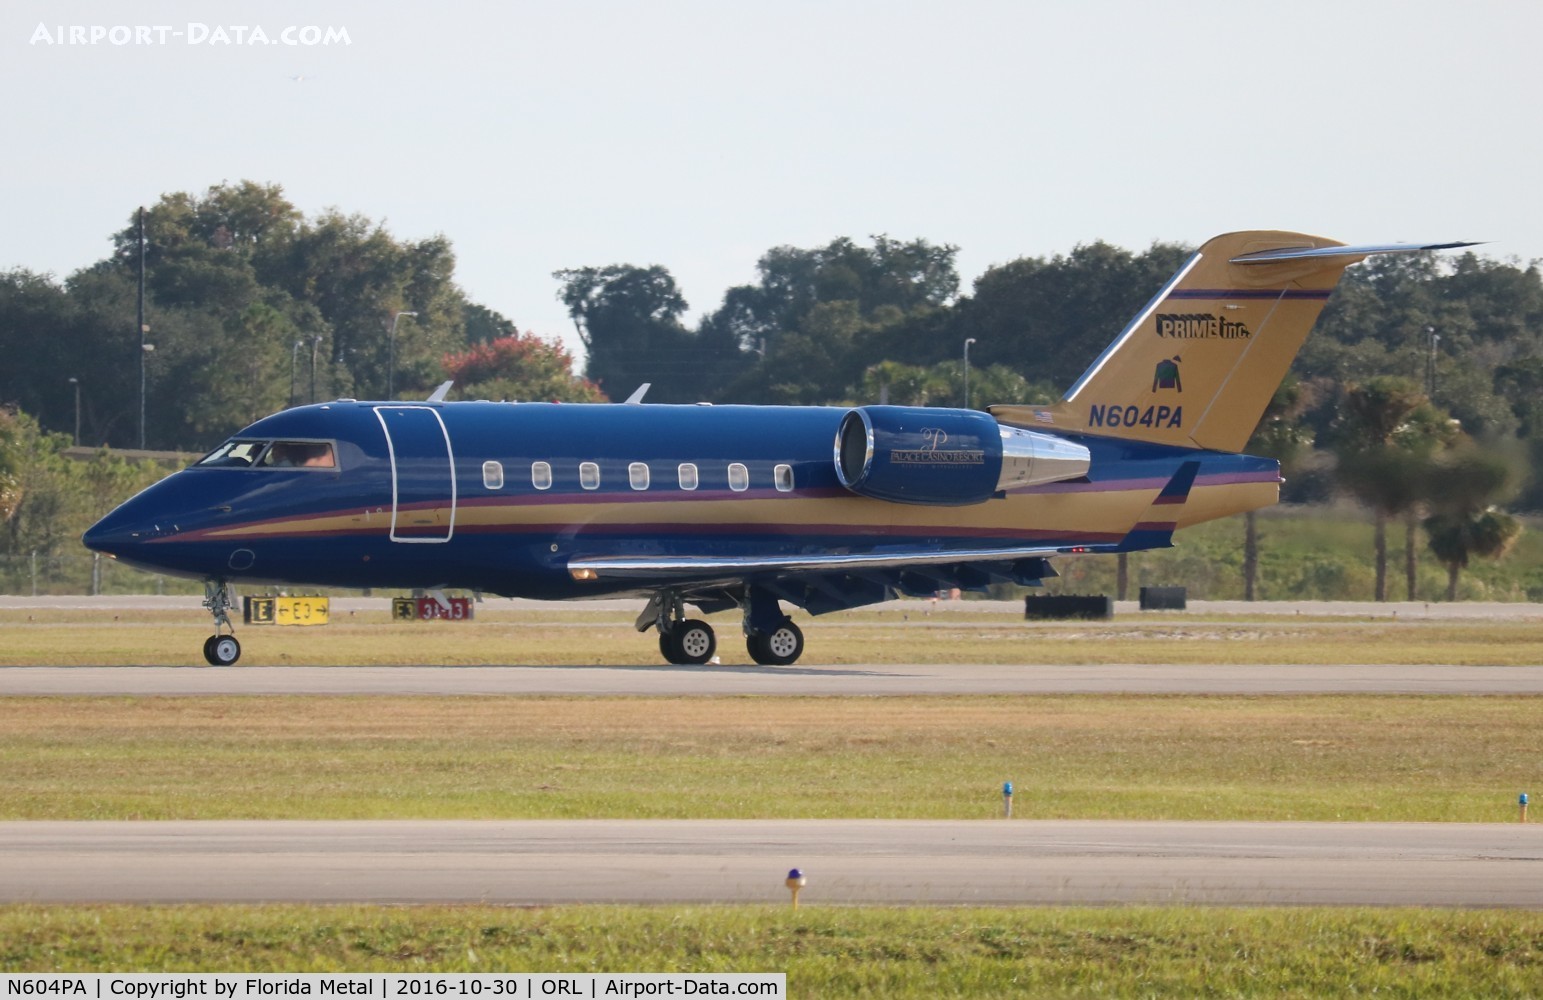 N604PA, 2003 Bombardier Challenger 604 (CL-600-2B16) C/N 5566, Challenger 604